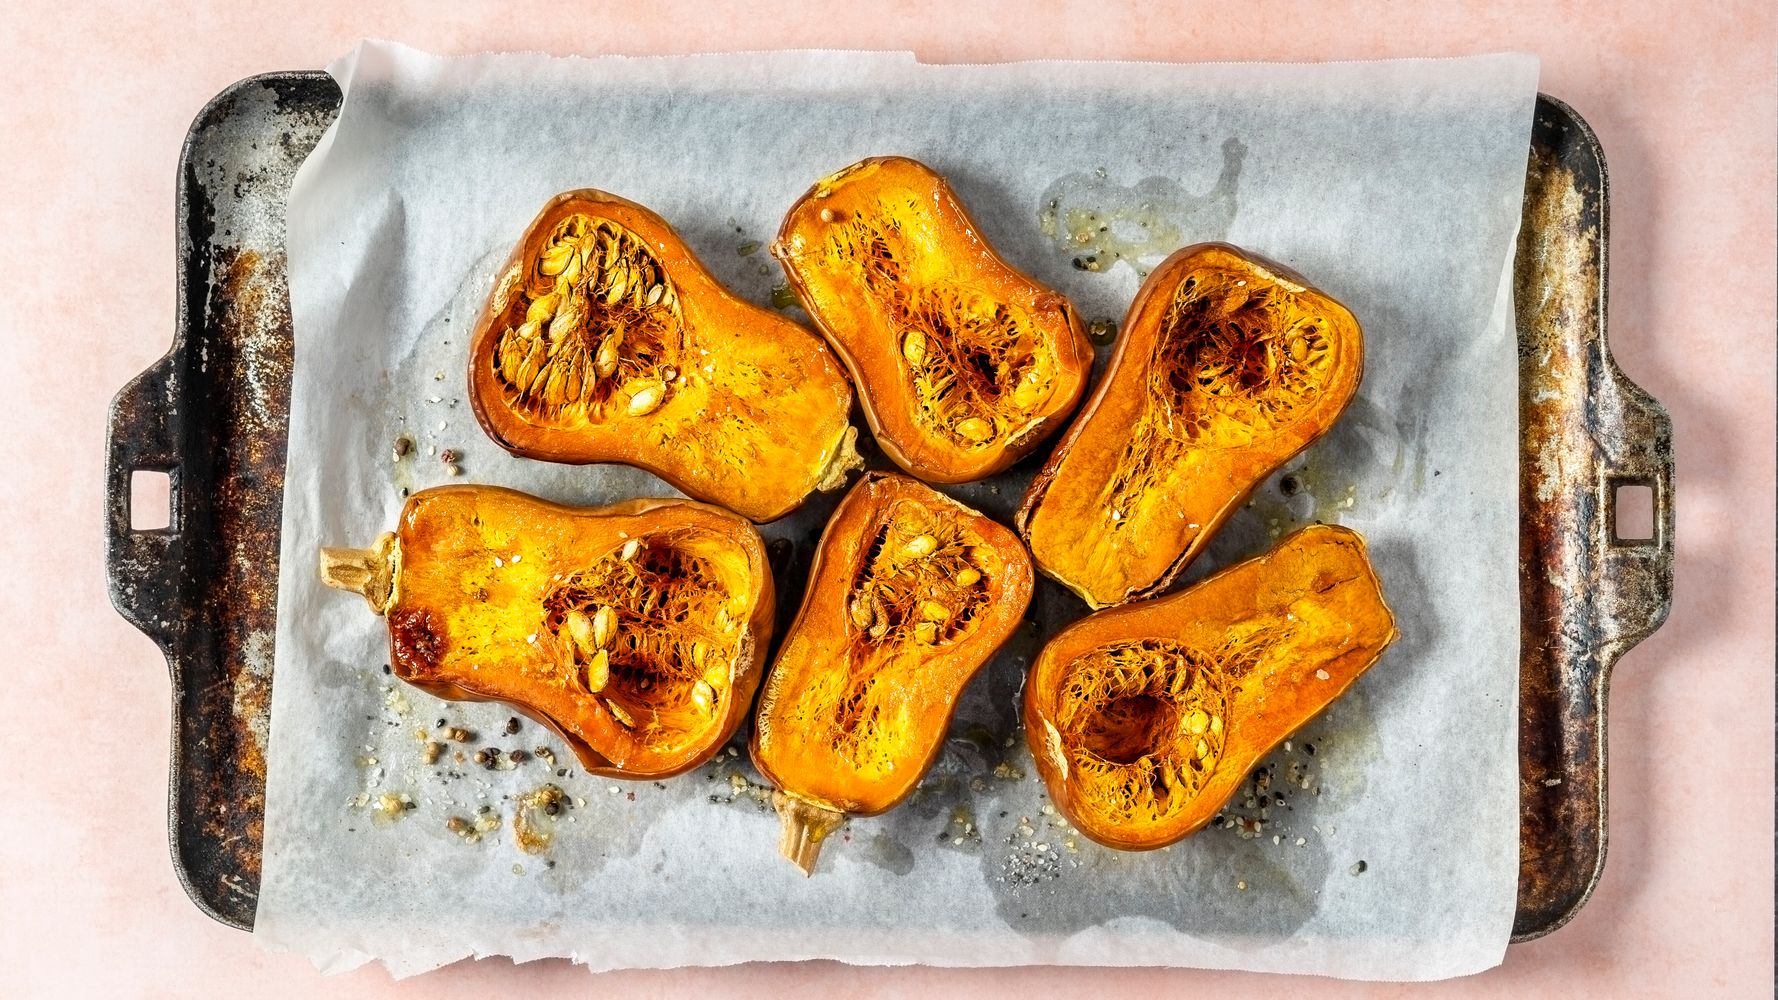 All about Butternut Squash - The Food Doctor - Your Gut Health Friend!